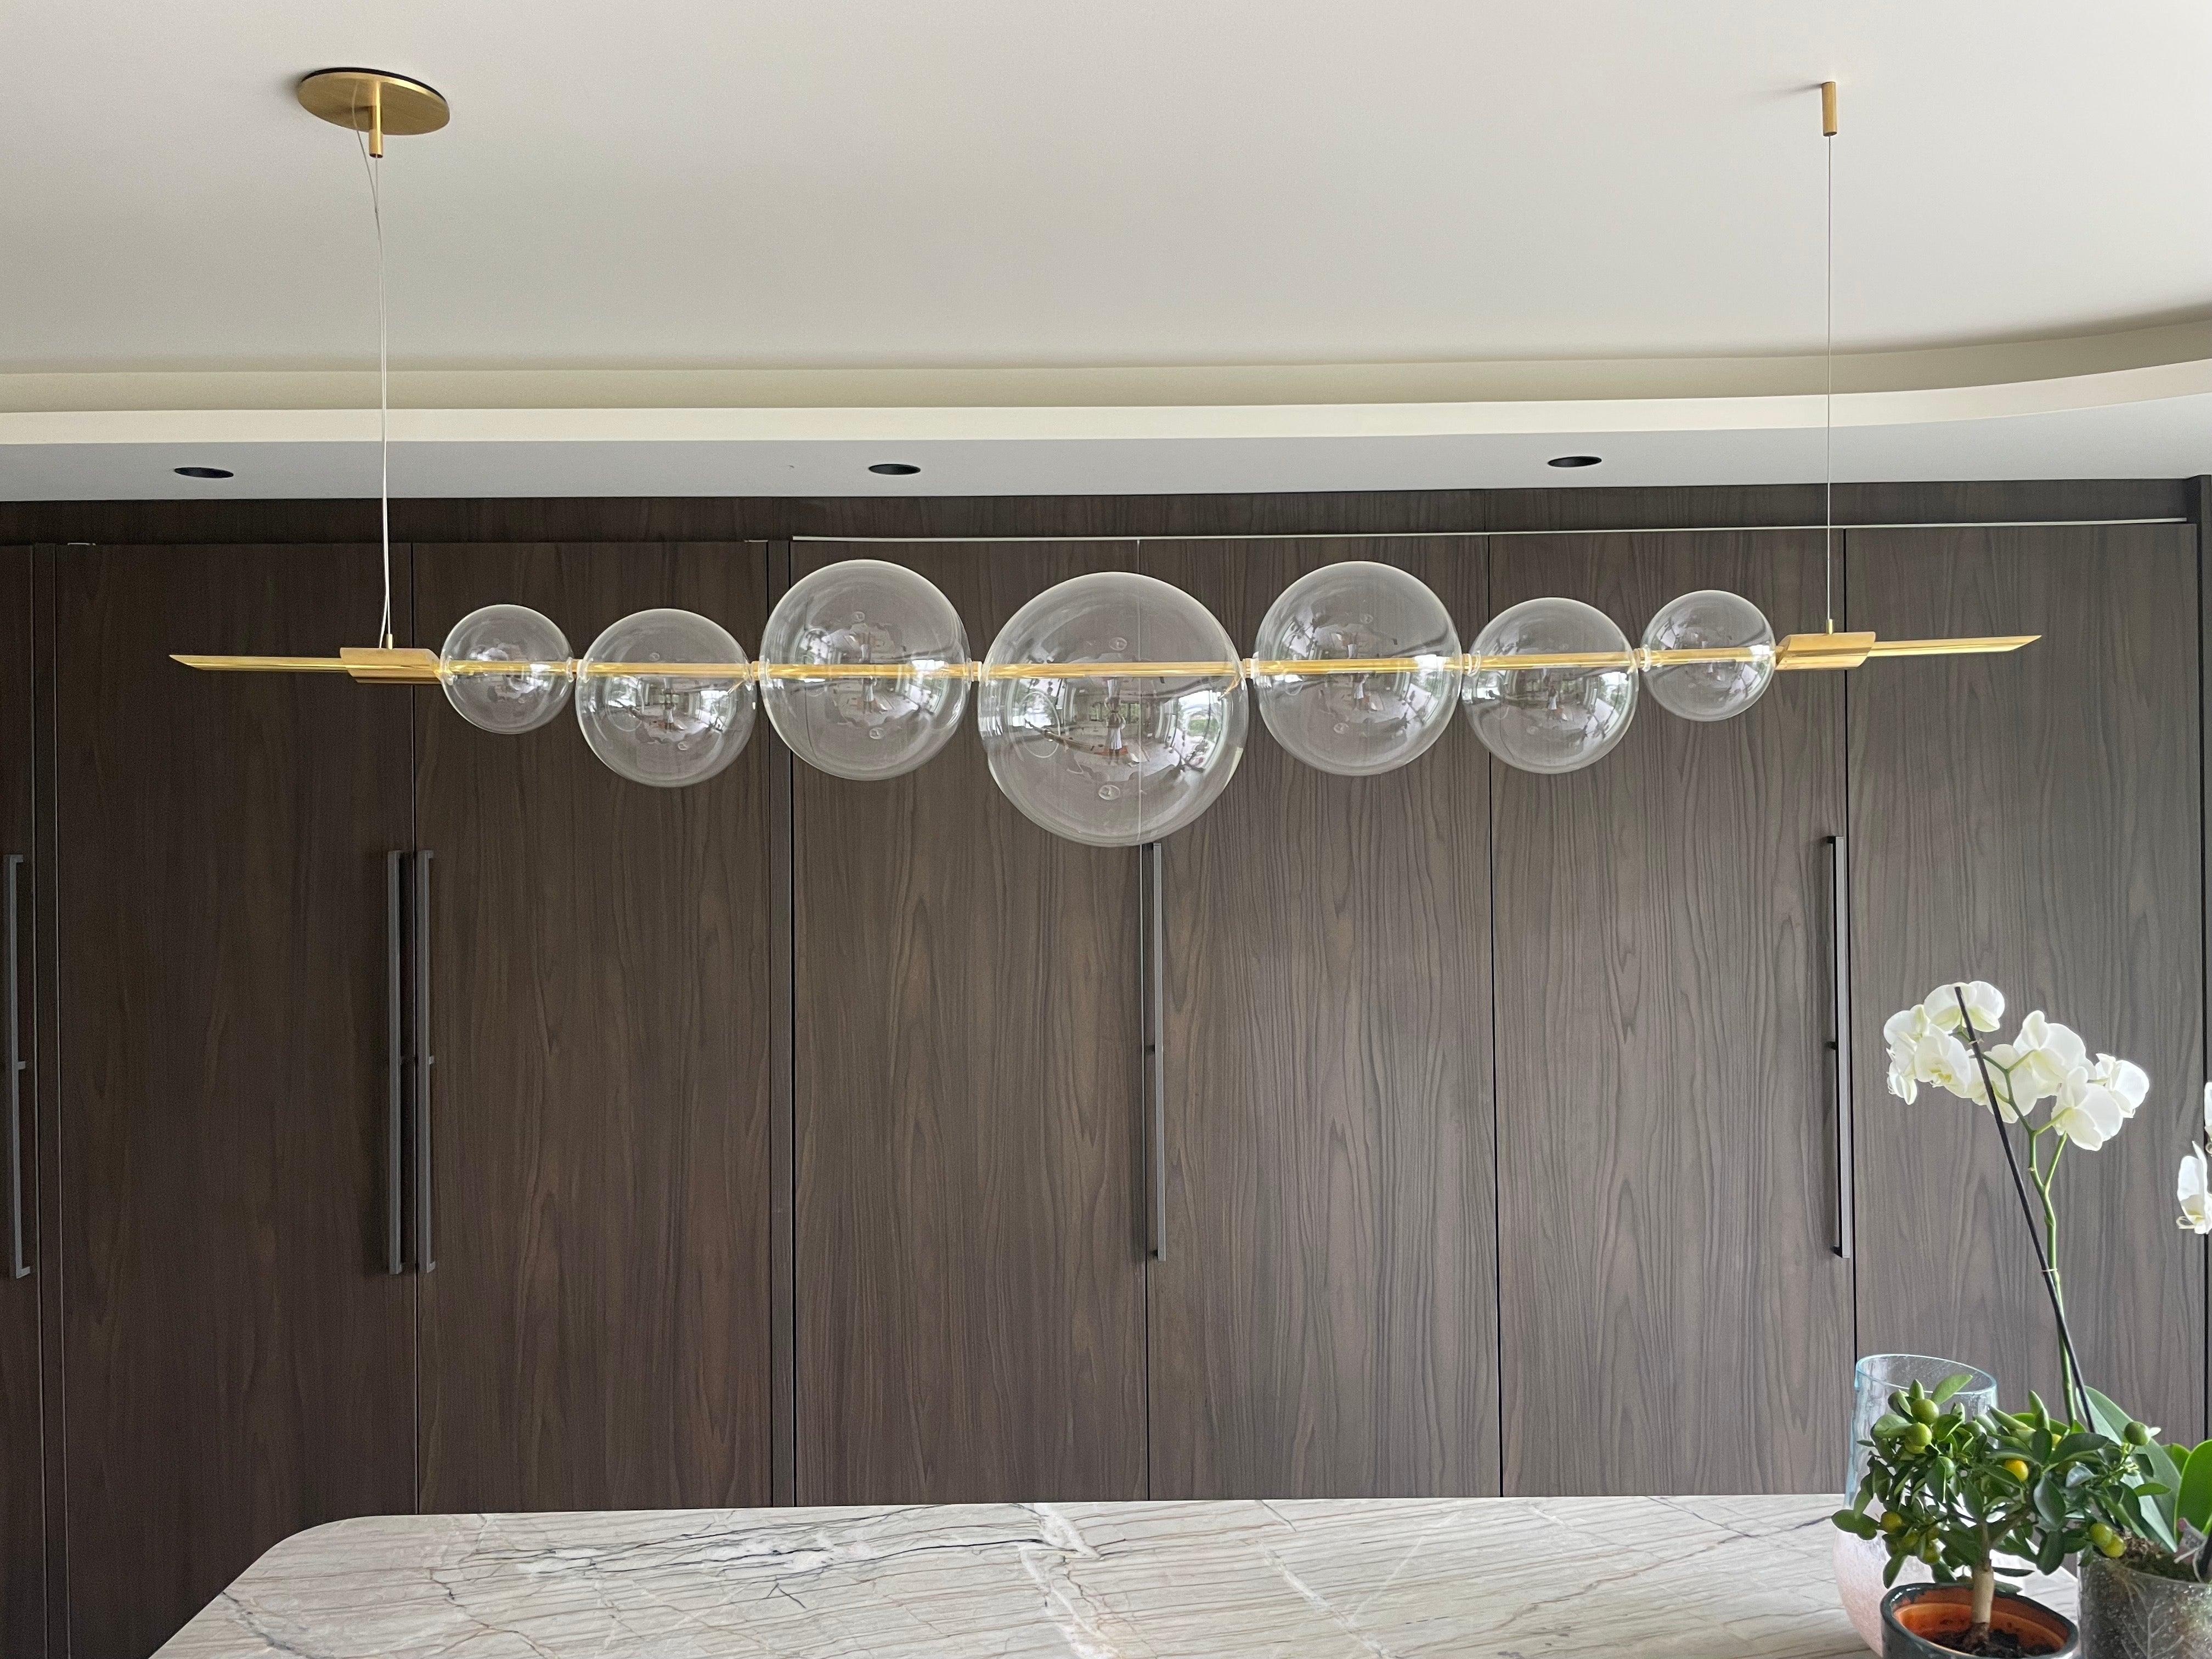 Dòry Contemporary Handmade Chandelier Brass, Blown Glass, LED Light, Dimmable In New Condition For Sale In Reggio Emilia, IT